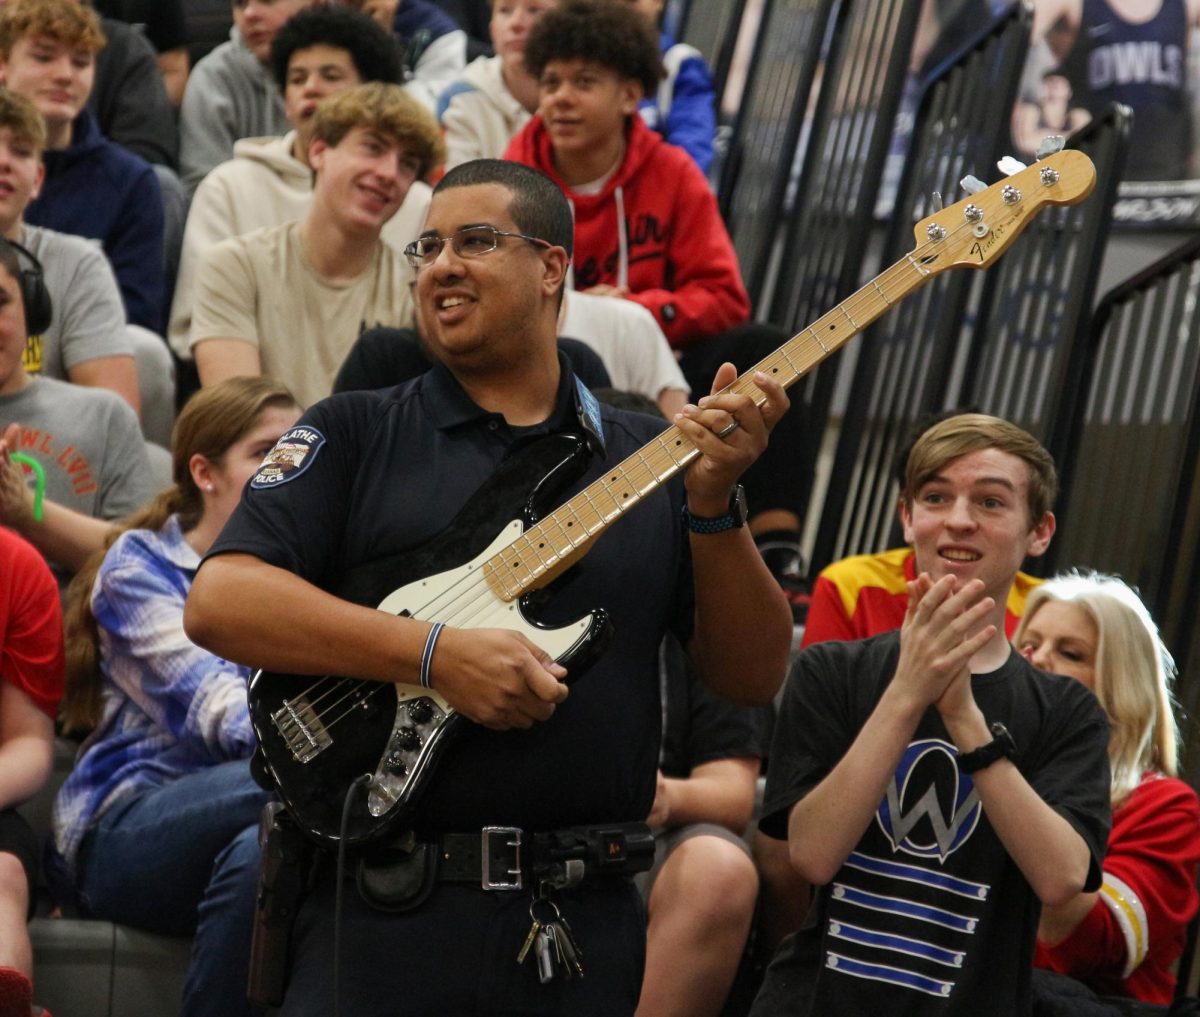 SRO officer Quintin Locke plays the bass guitar as he participates in the musical game where you try to play a song with a random instrument and the crowd tries to guess.  